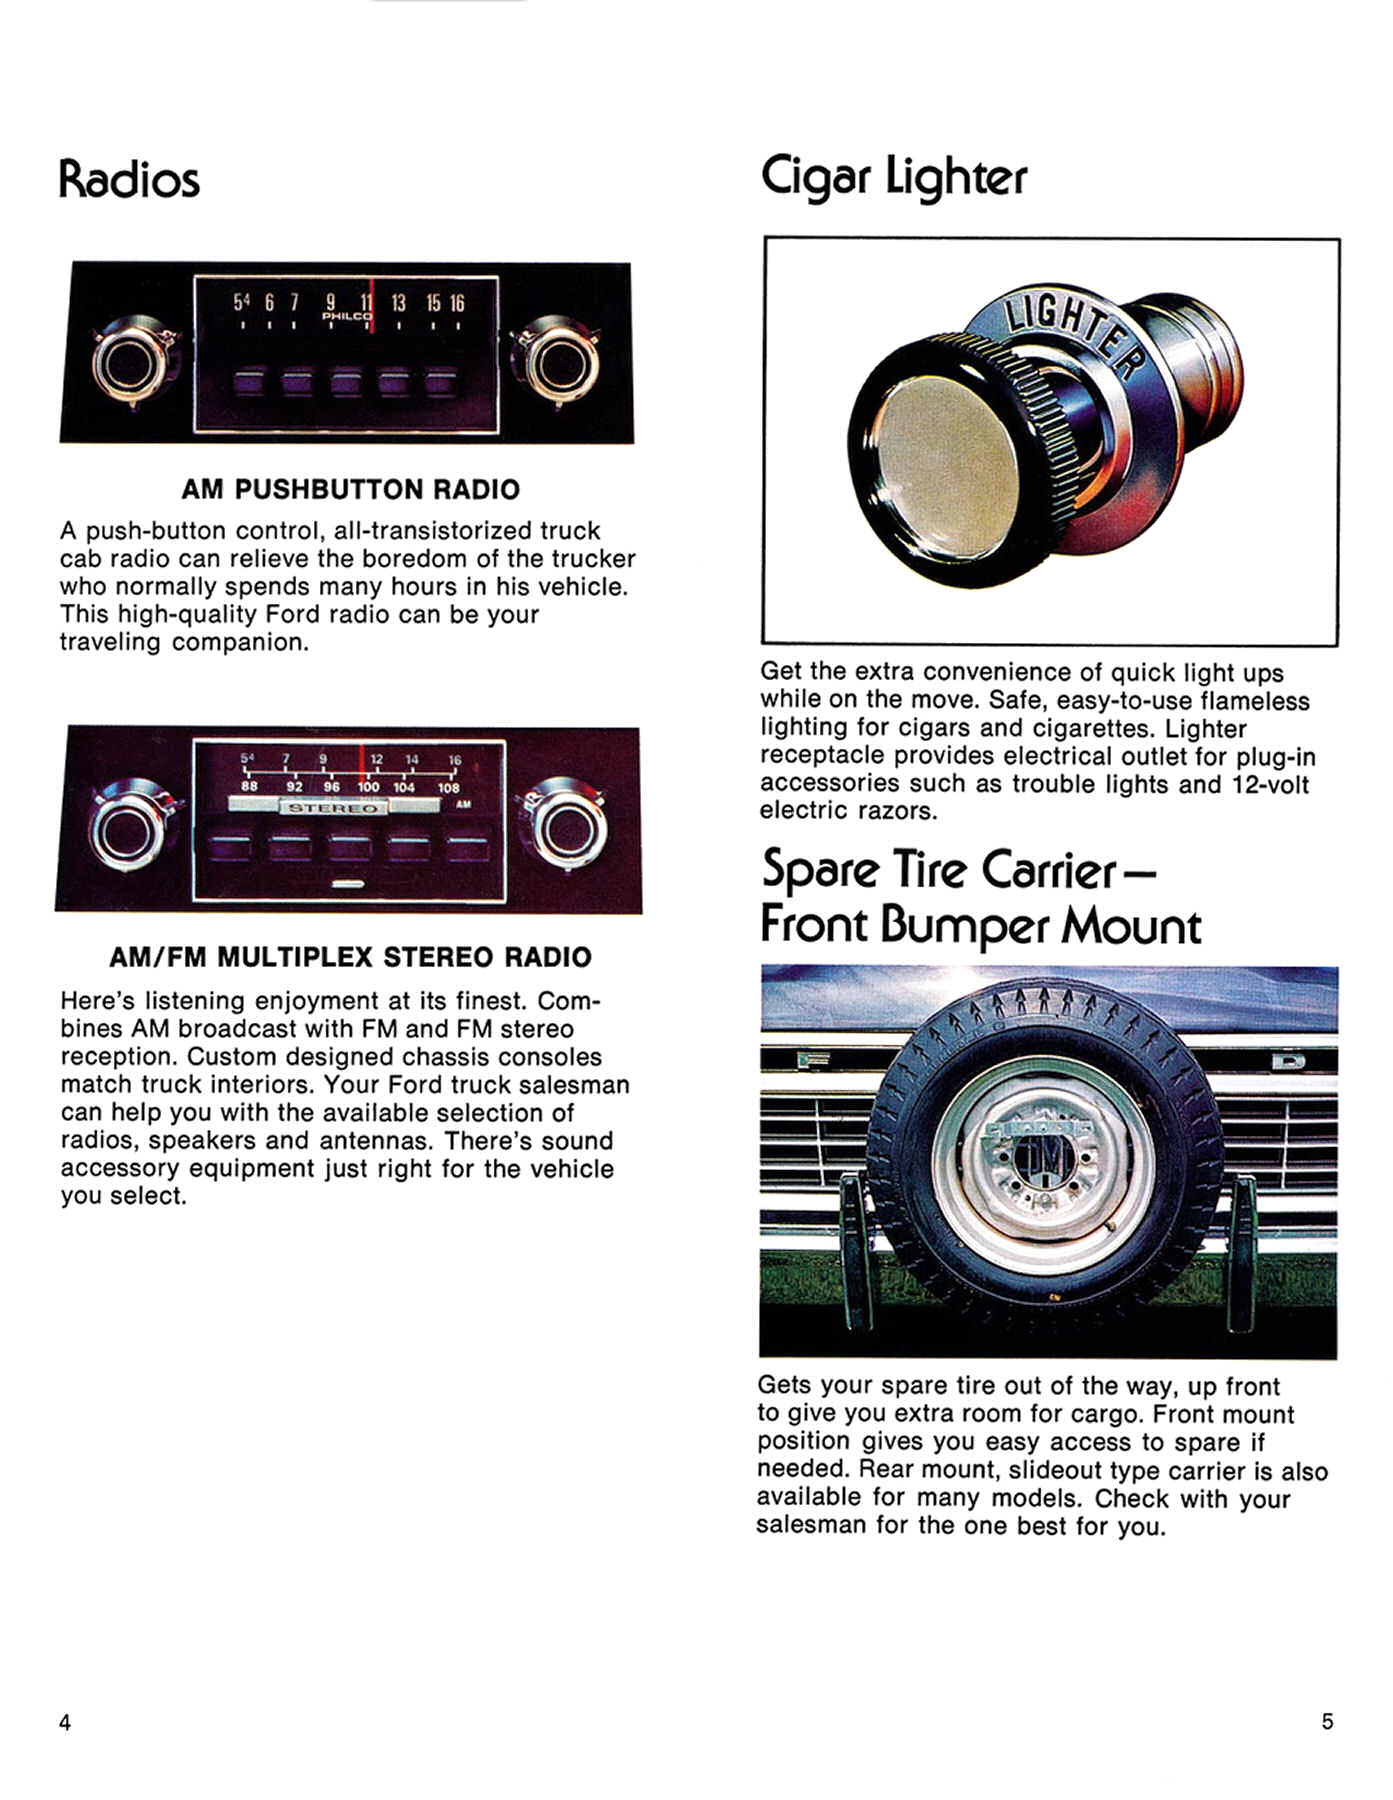 1976 Ford Light Truck Accessories-04-05